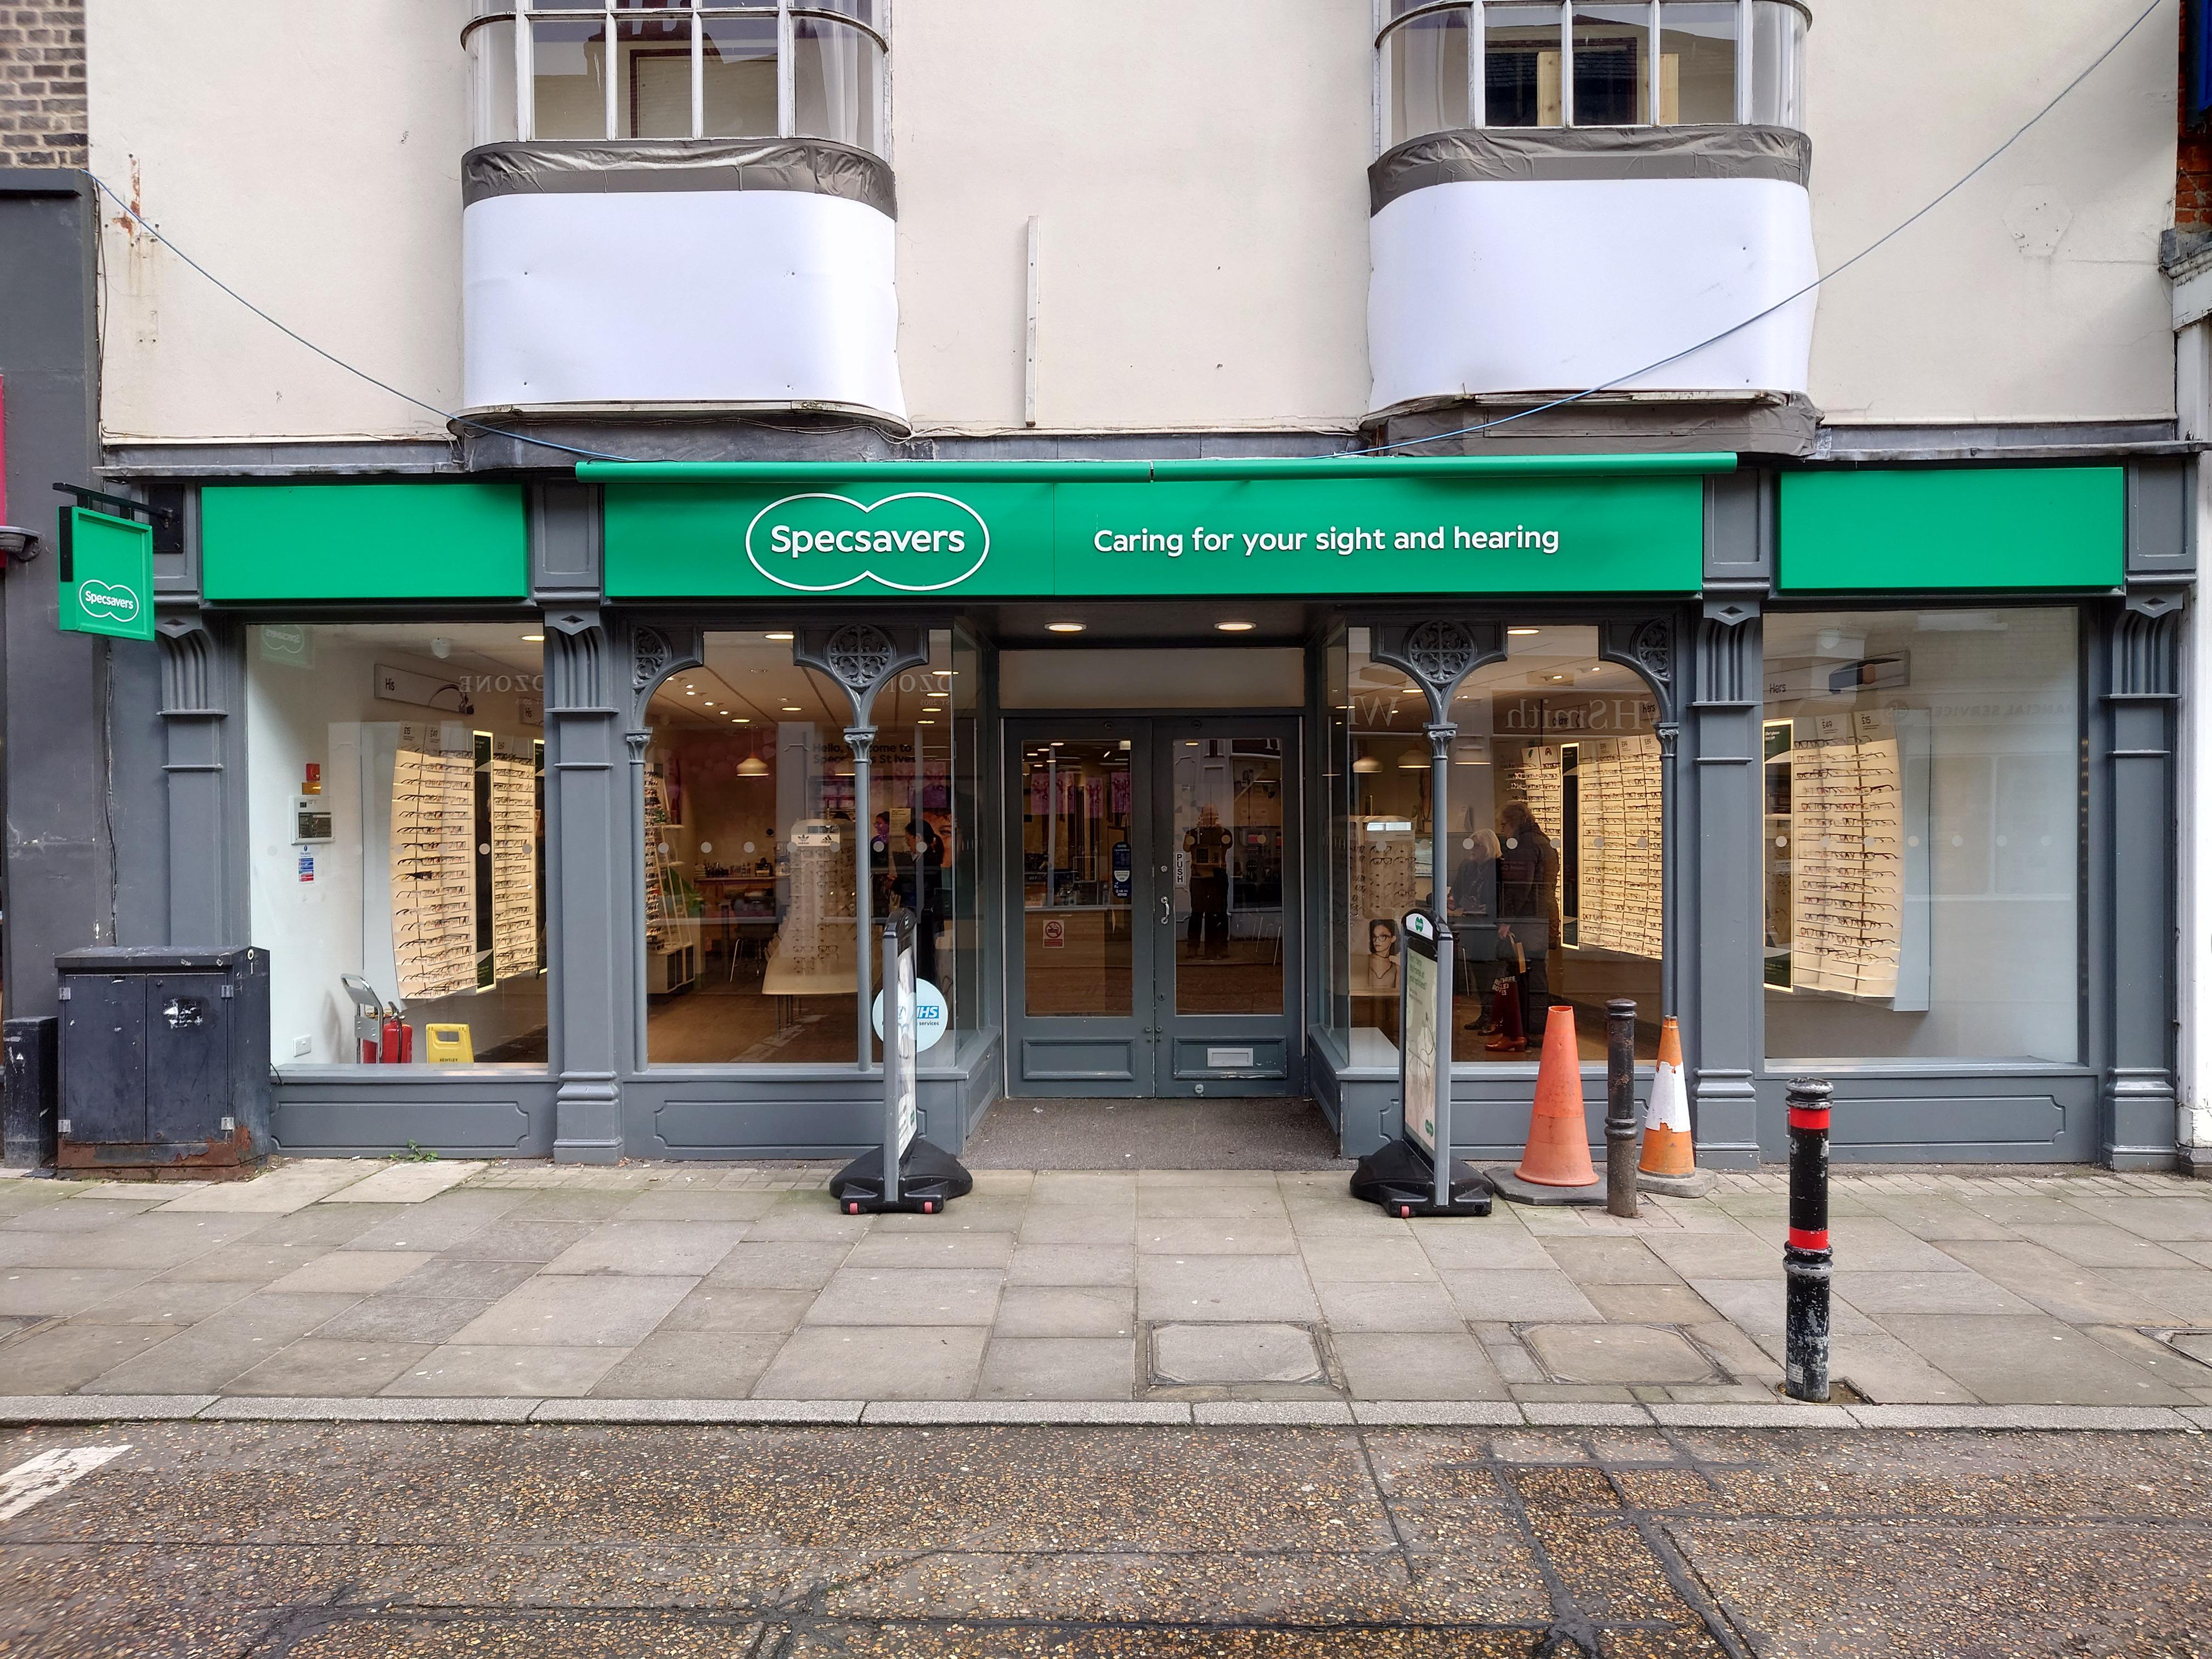 Images Specsavers Opticians and Audiologists - St Ives